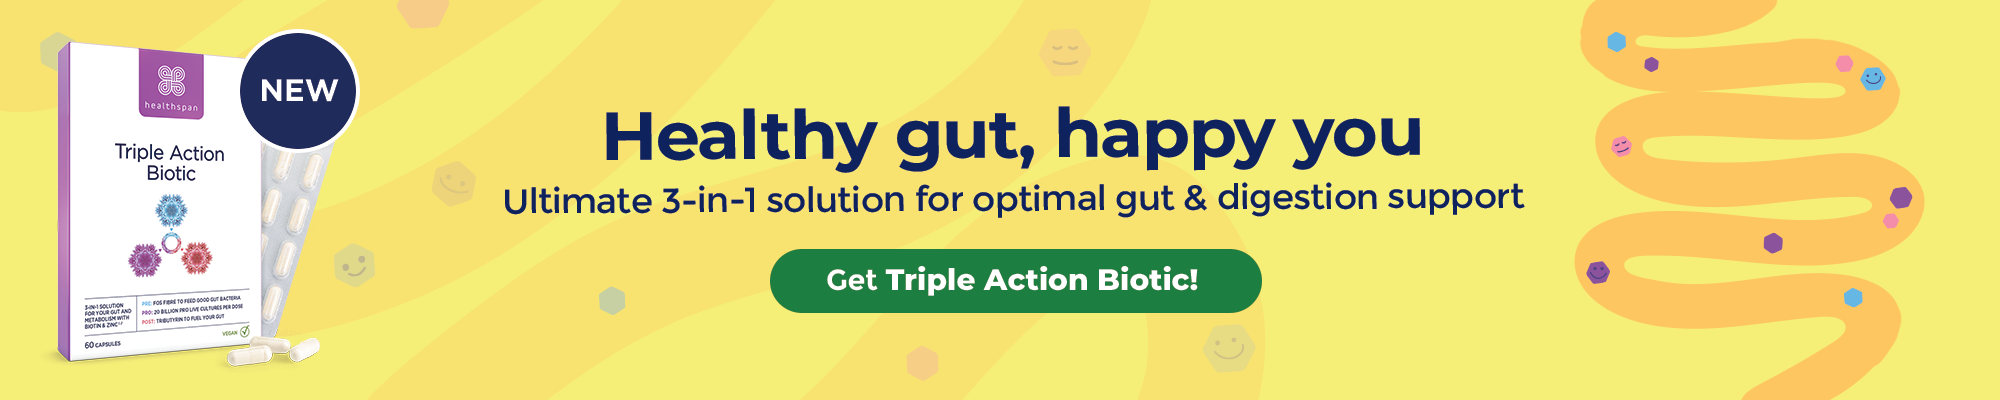 New - Triple Action Biotic. Healthy gut, happy you. For optimal gut & digestion support. Buy now.